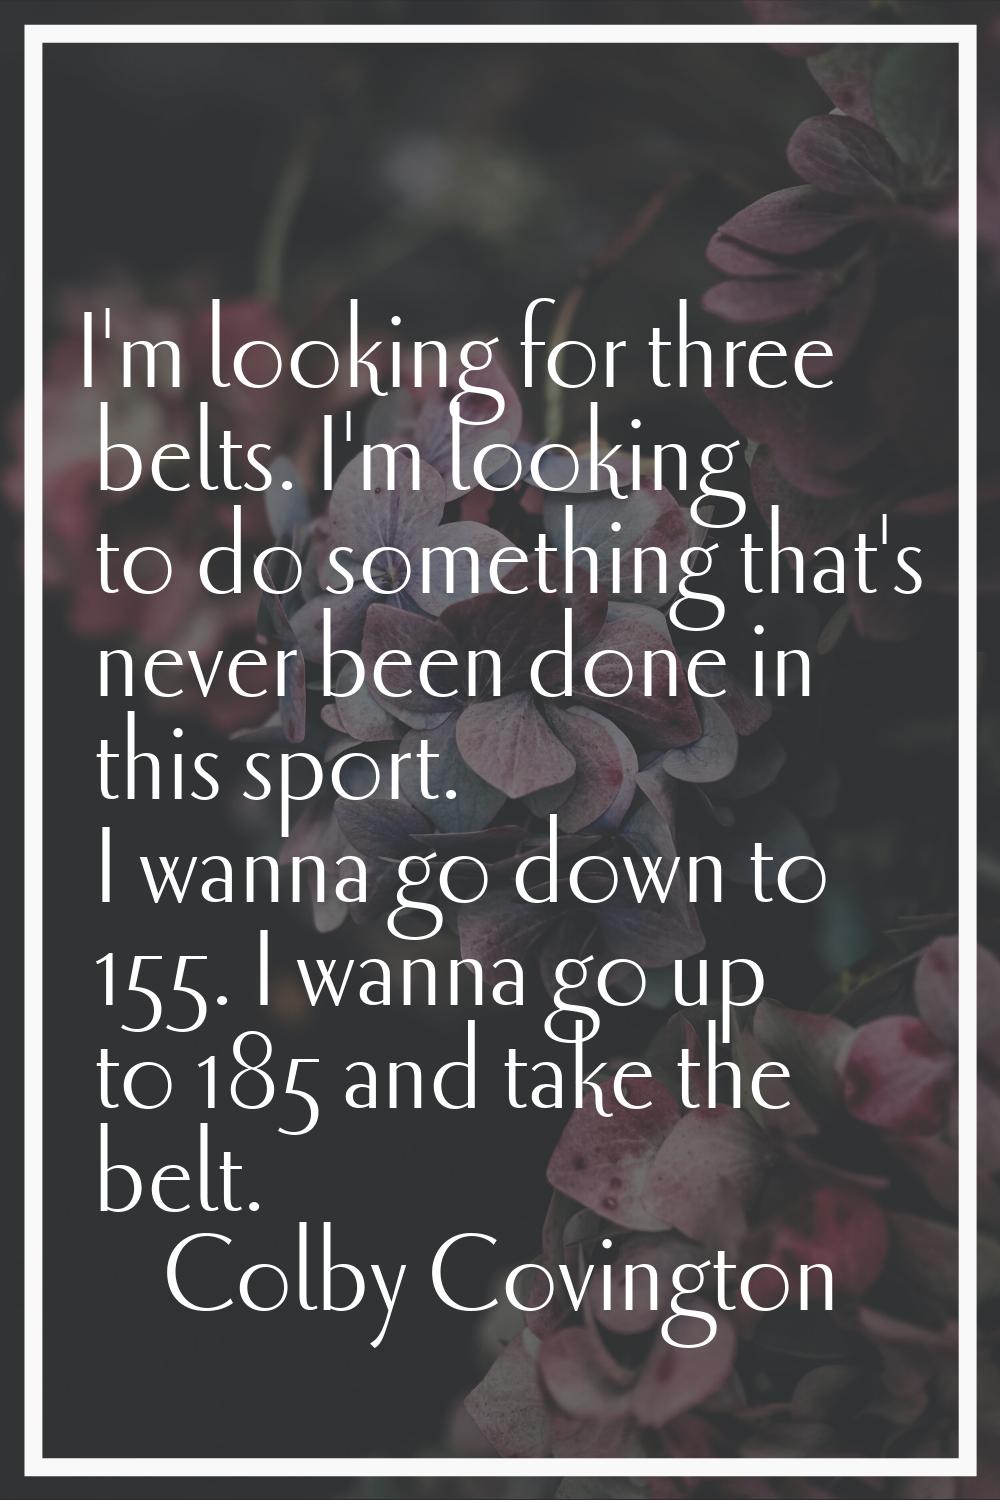 I'm looking for three belts. I'm looking to do something that's never been done in this sport. I wa